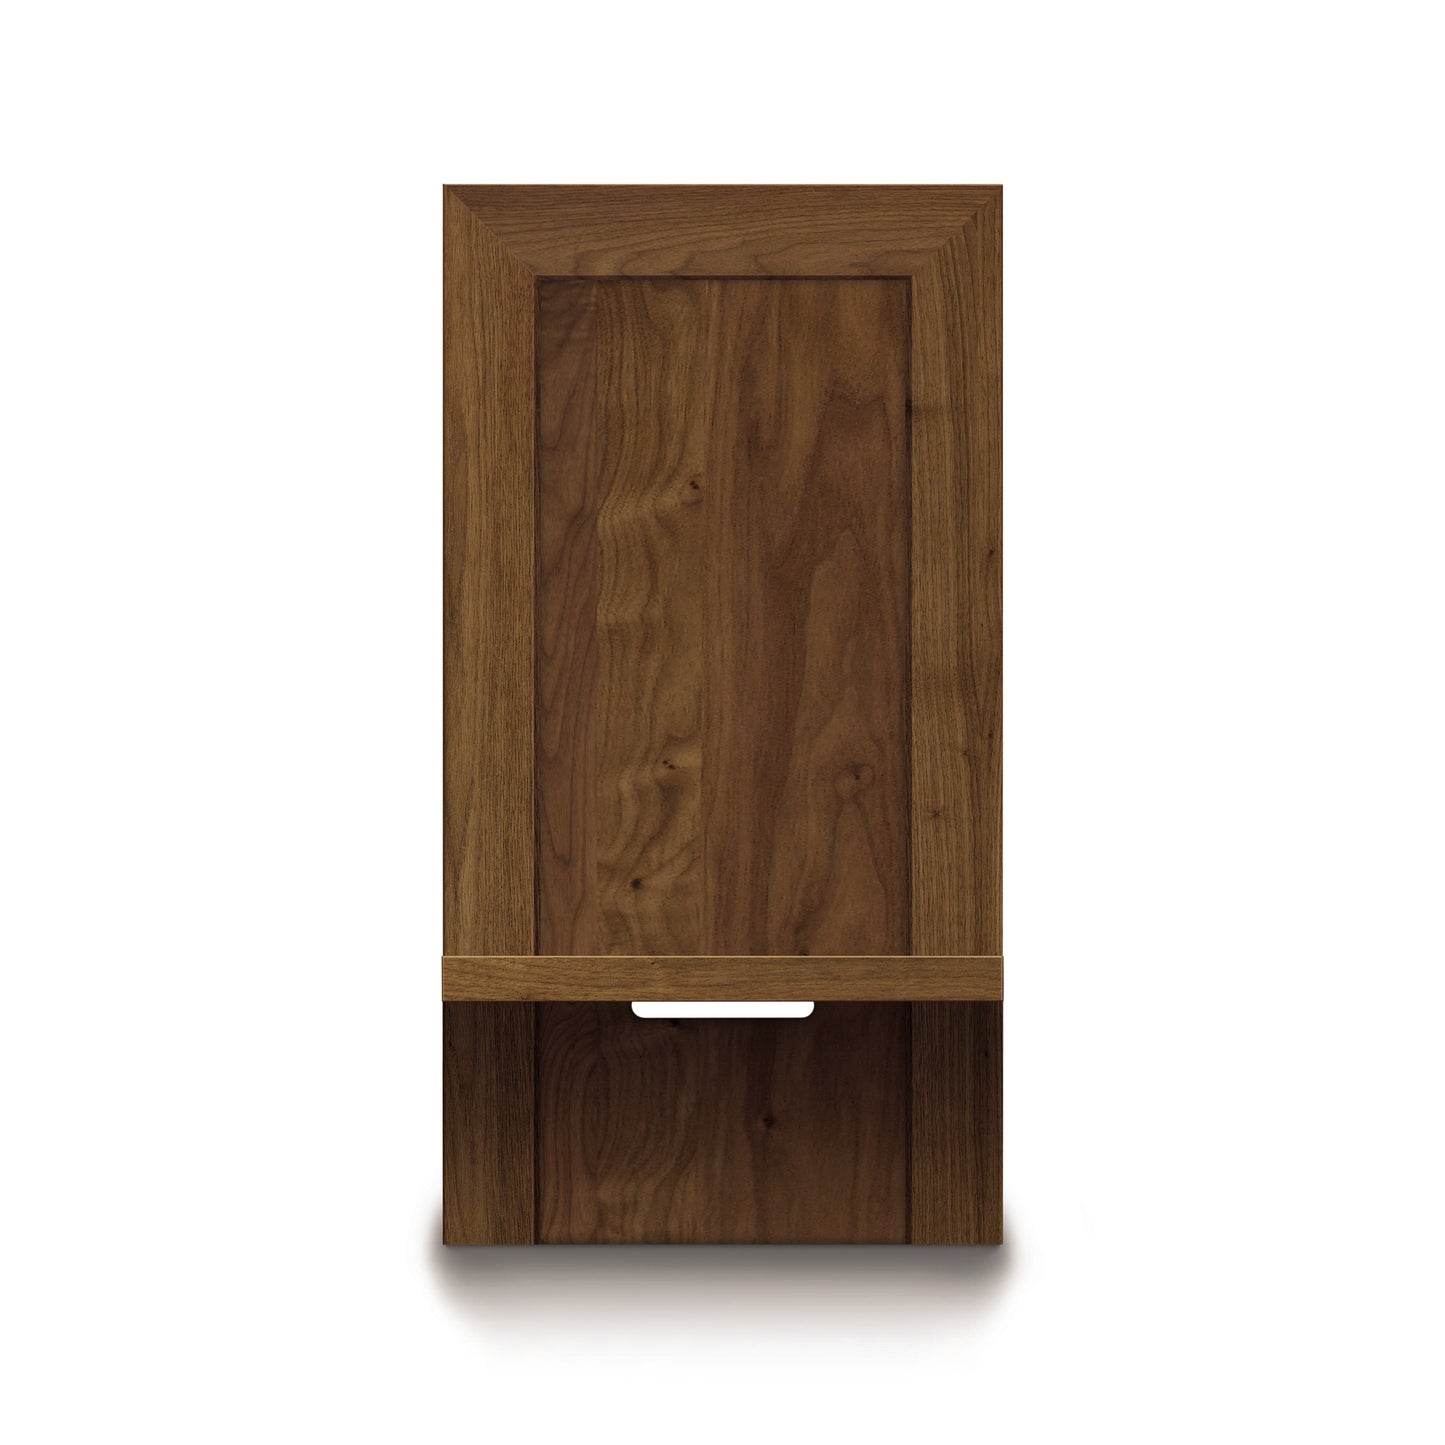 A single, closed wooden cabinet door with a metal handle from the Copeland Furniture Moduluxe Attached Nightstand with Shelf - 35" Series, isolated on a white background.